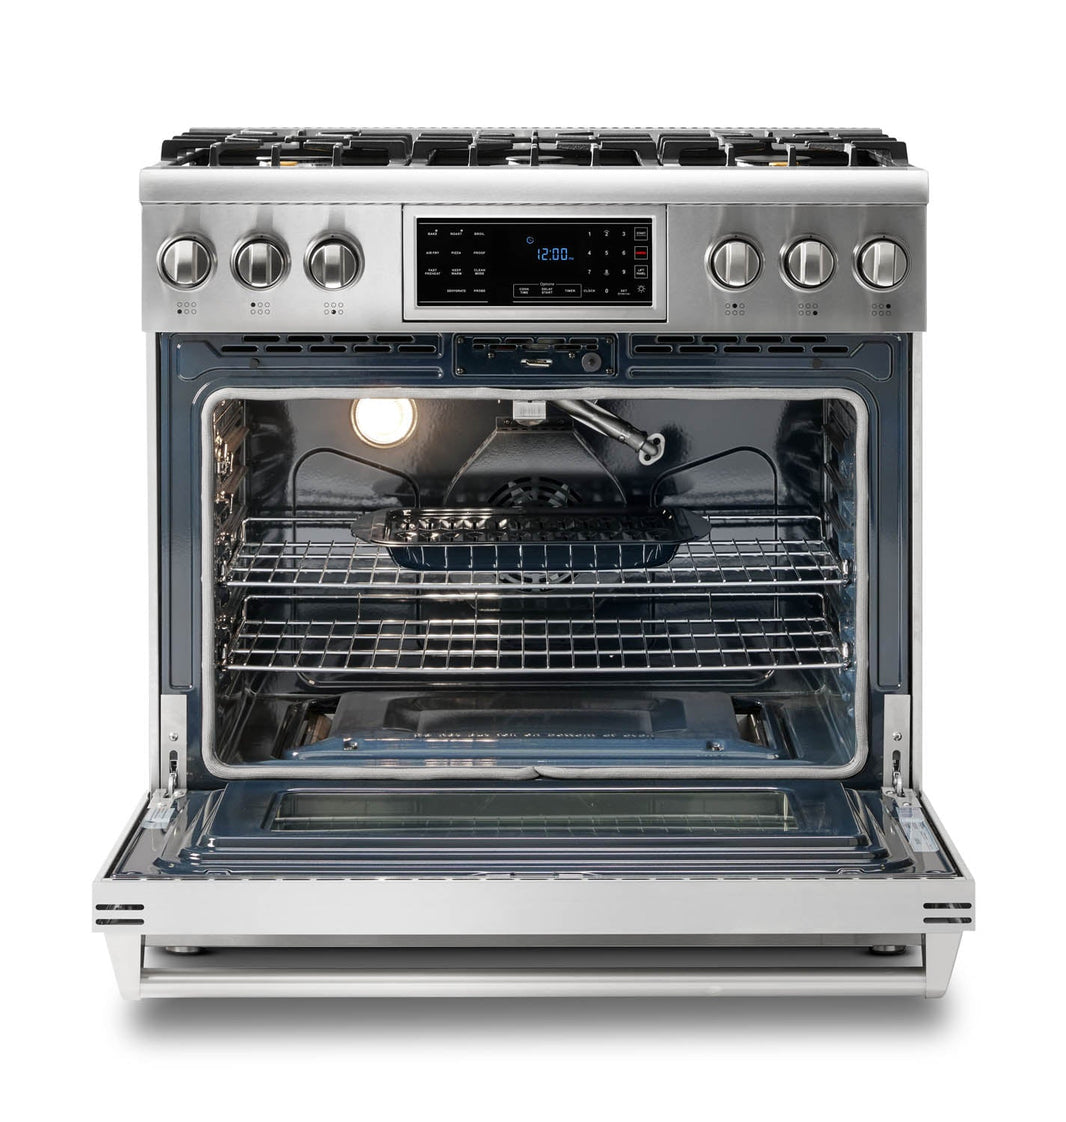 Thor Kitchen 36-Inch 6.0 Cu. Ft. Oven Gas Range with Tilt Panel and Self-Cleaning Oven in Stainless Steel (TRG3601)